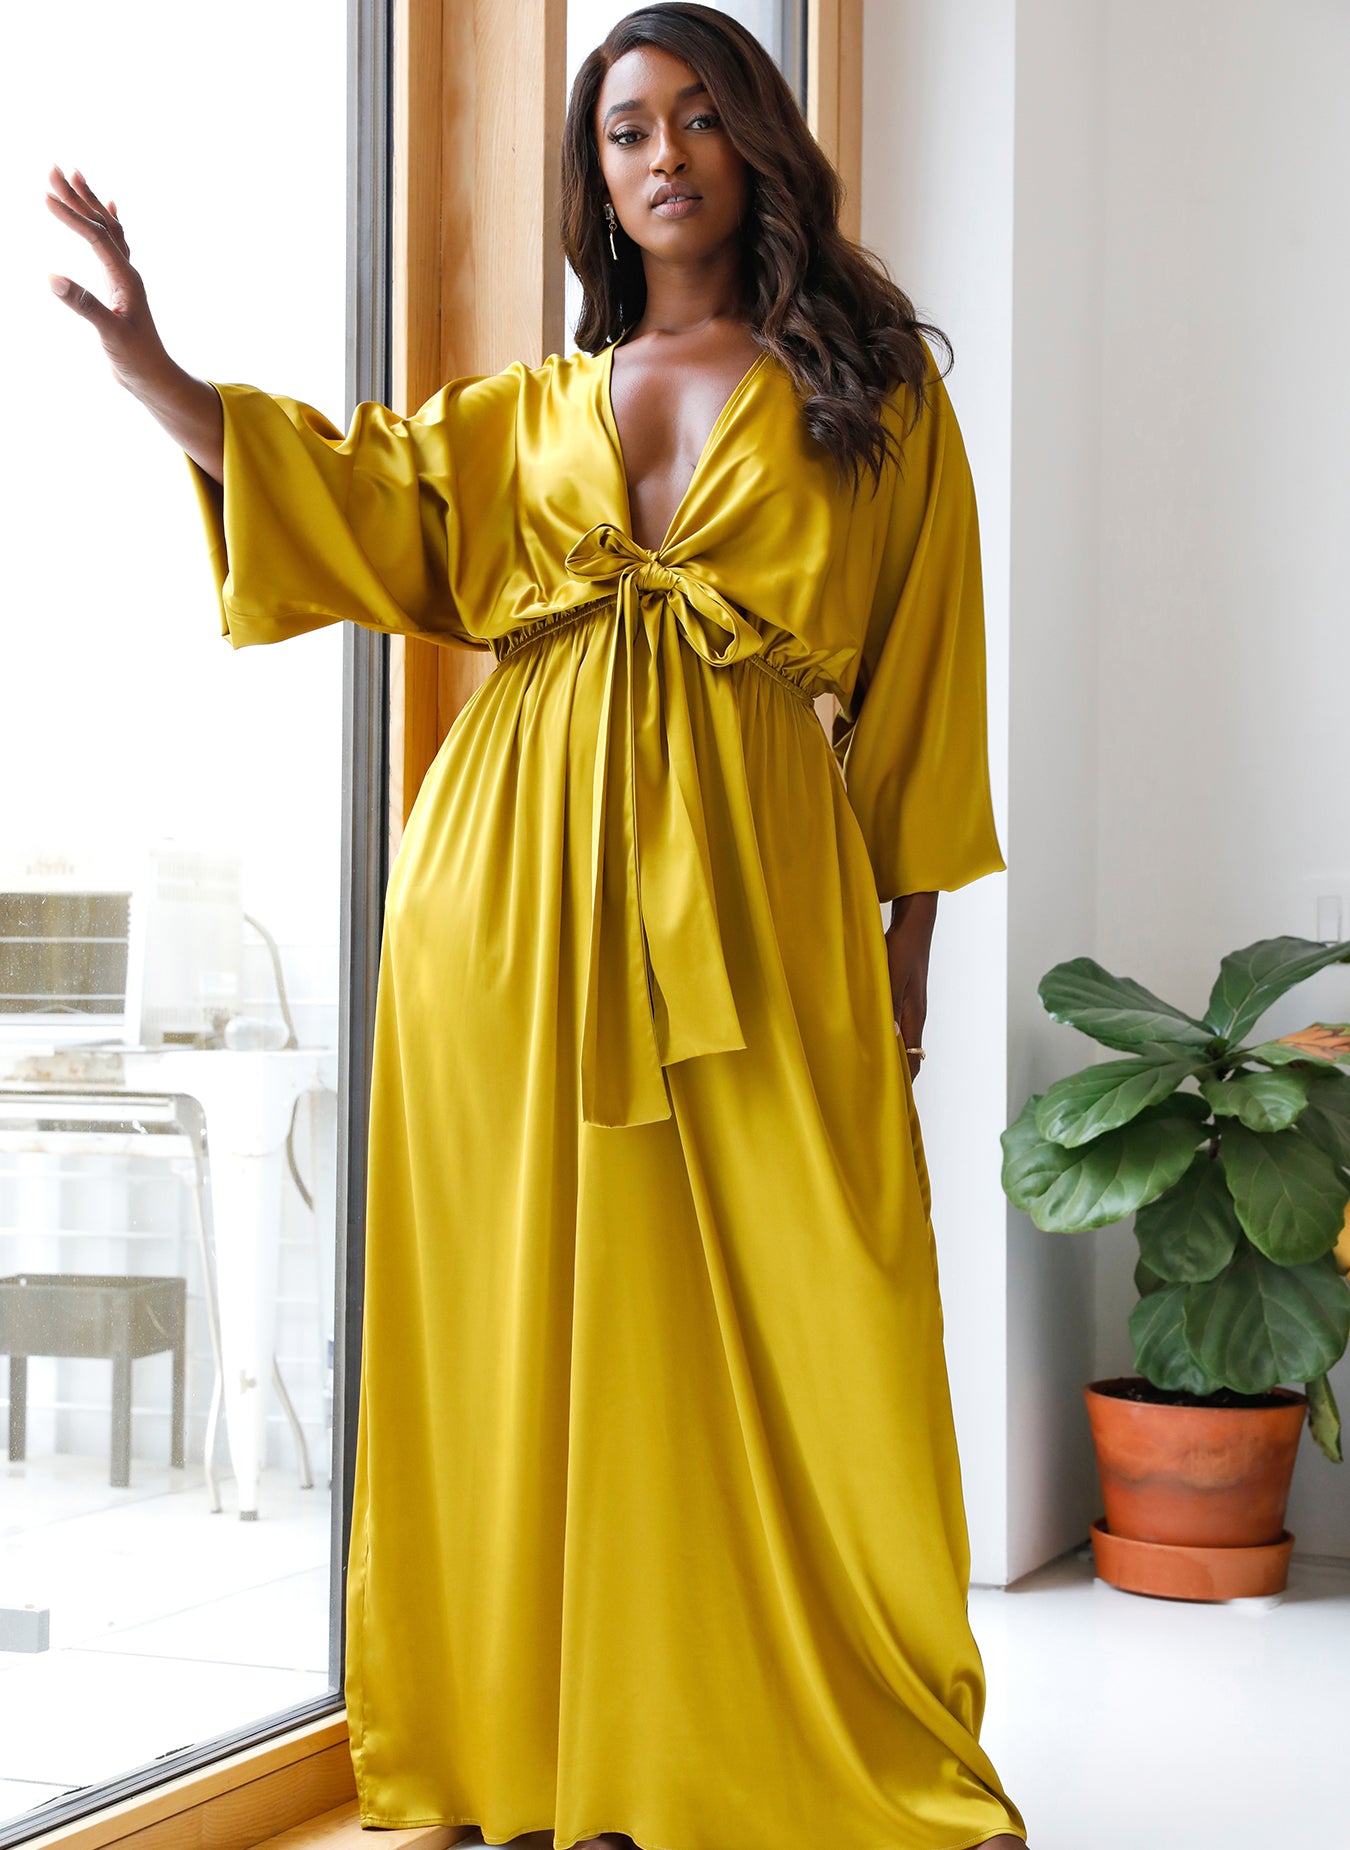 Calliope Satin Tie Front Maxi A Line Dress W. Pockets - Chartreuse